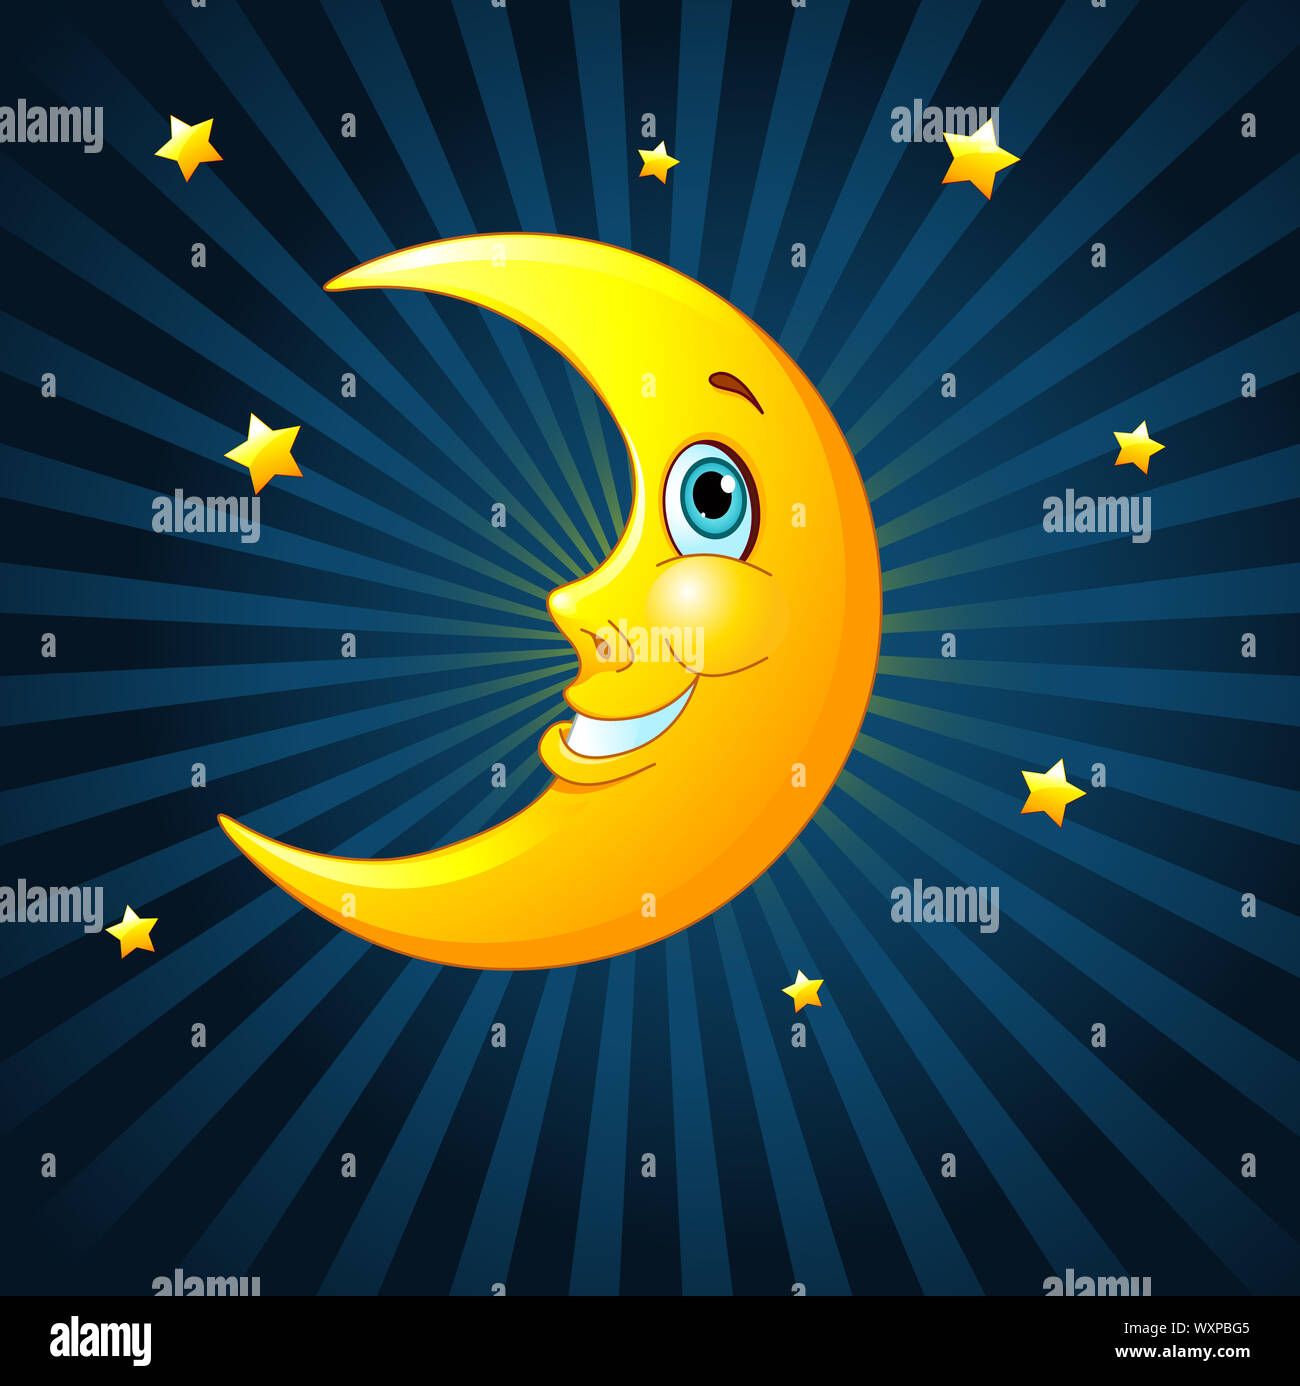 Smiling moon on radial background. Stock Photo